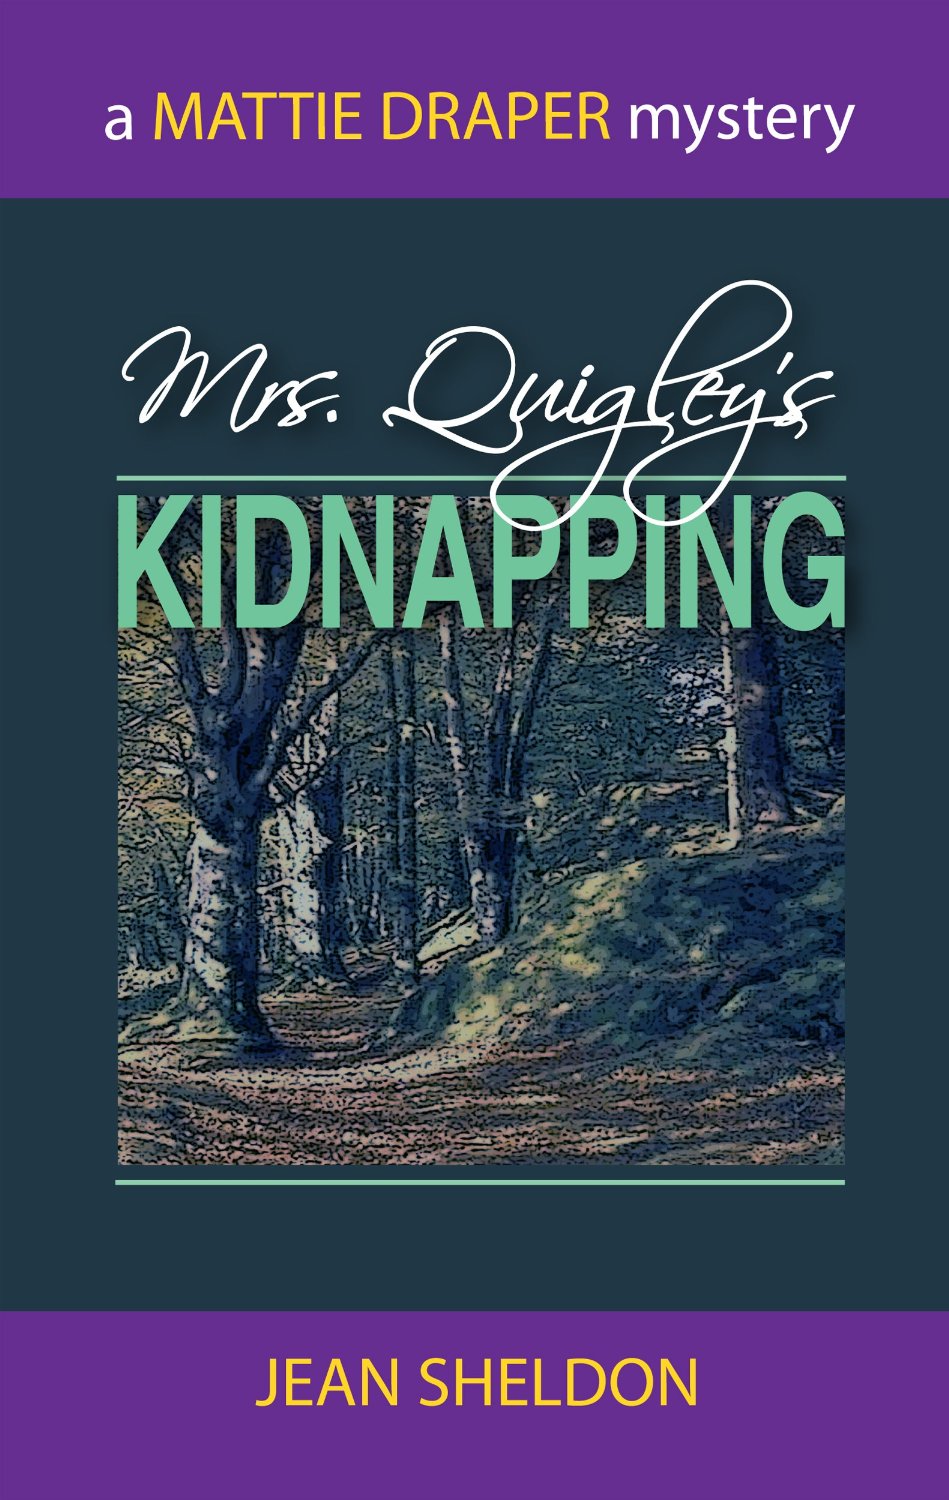 Mrs. Quigley’s Kidnapping by Jean Sheldon